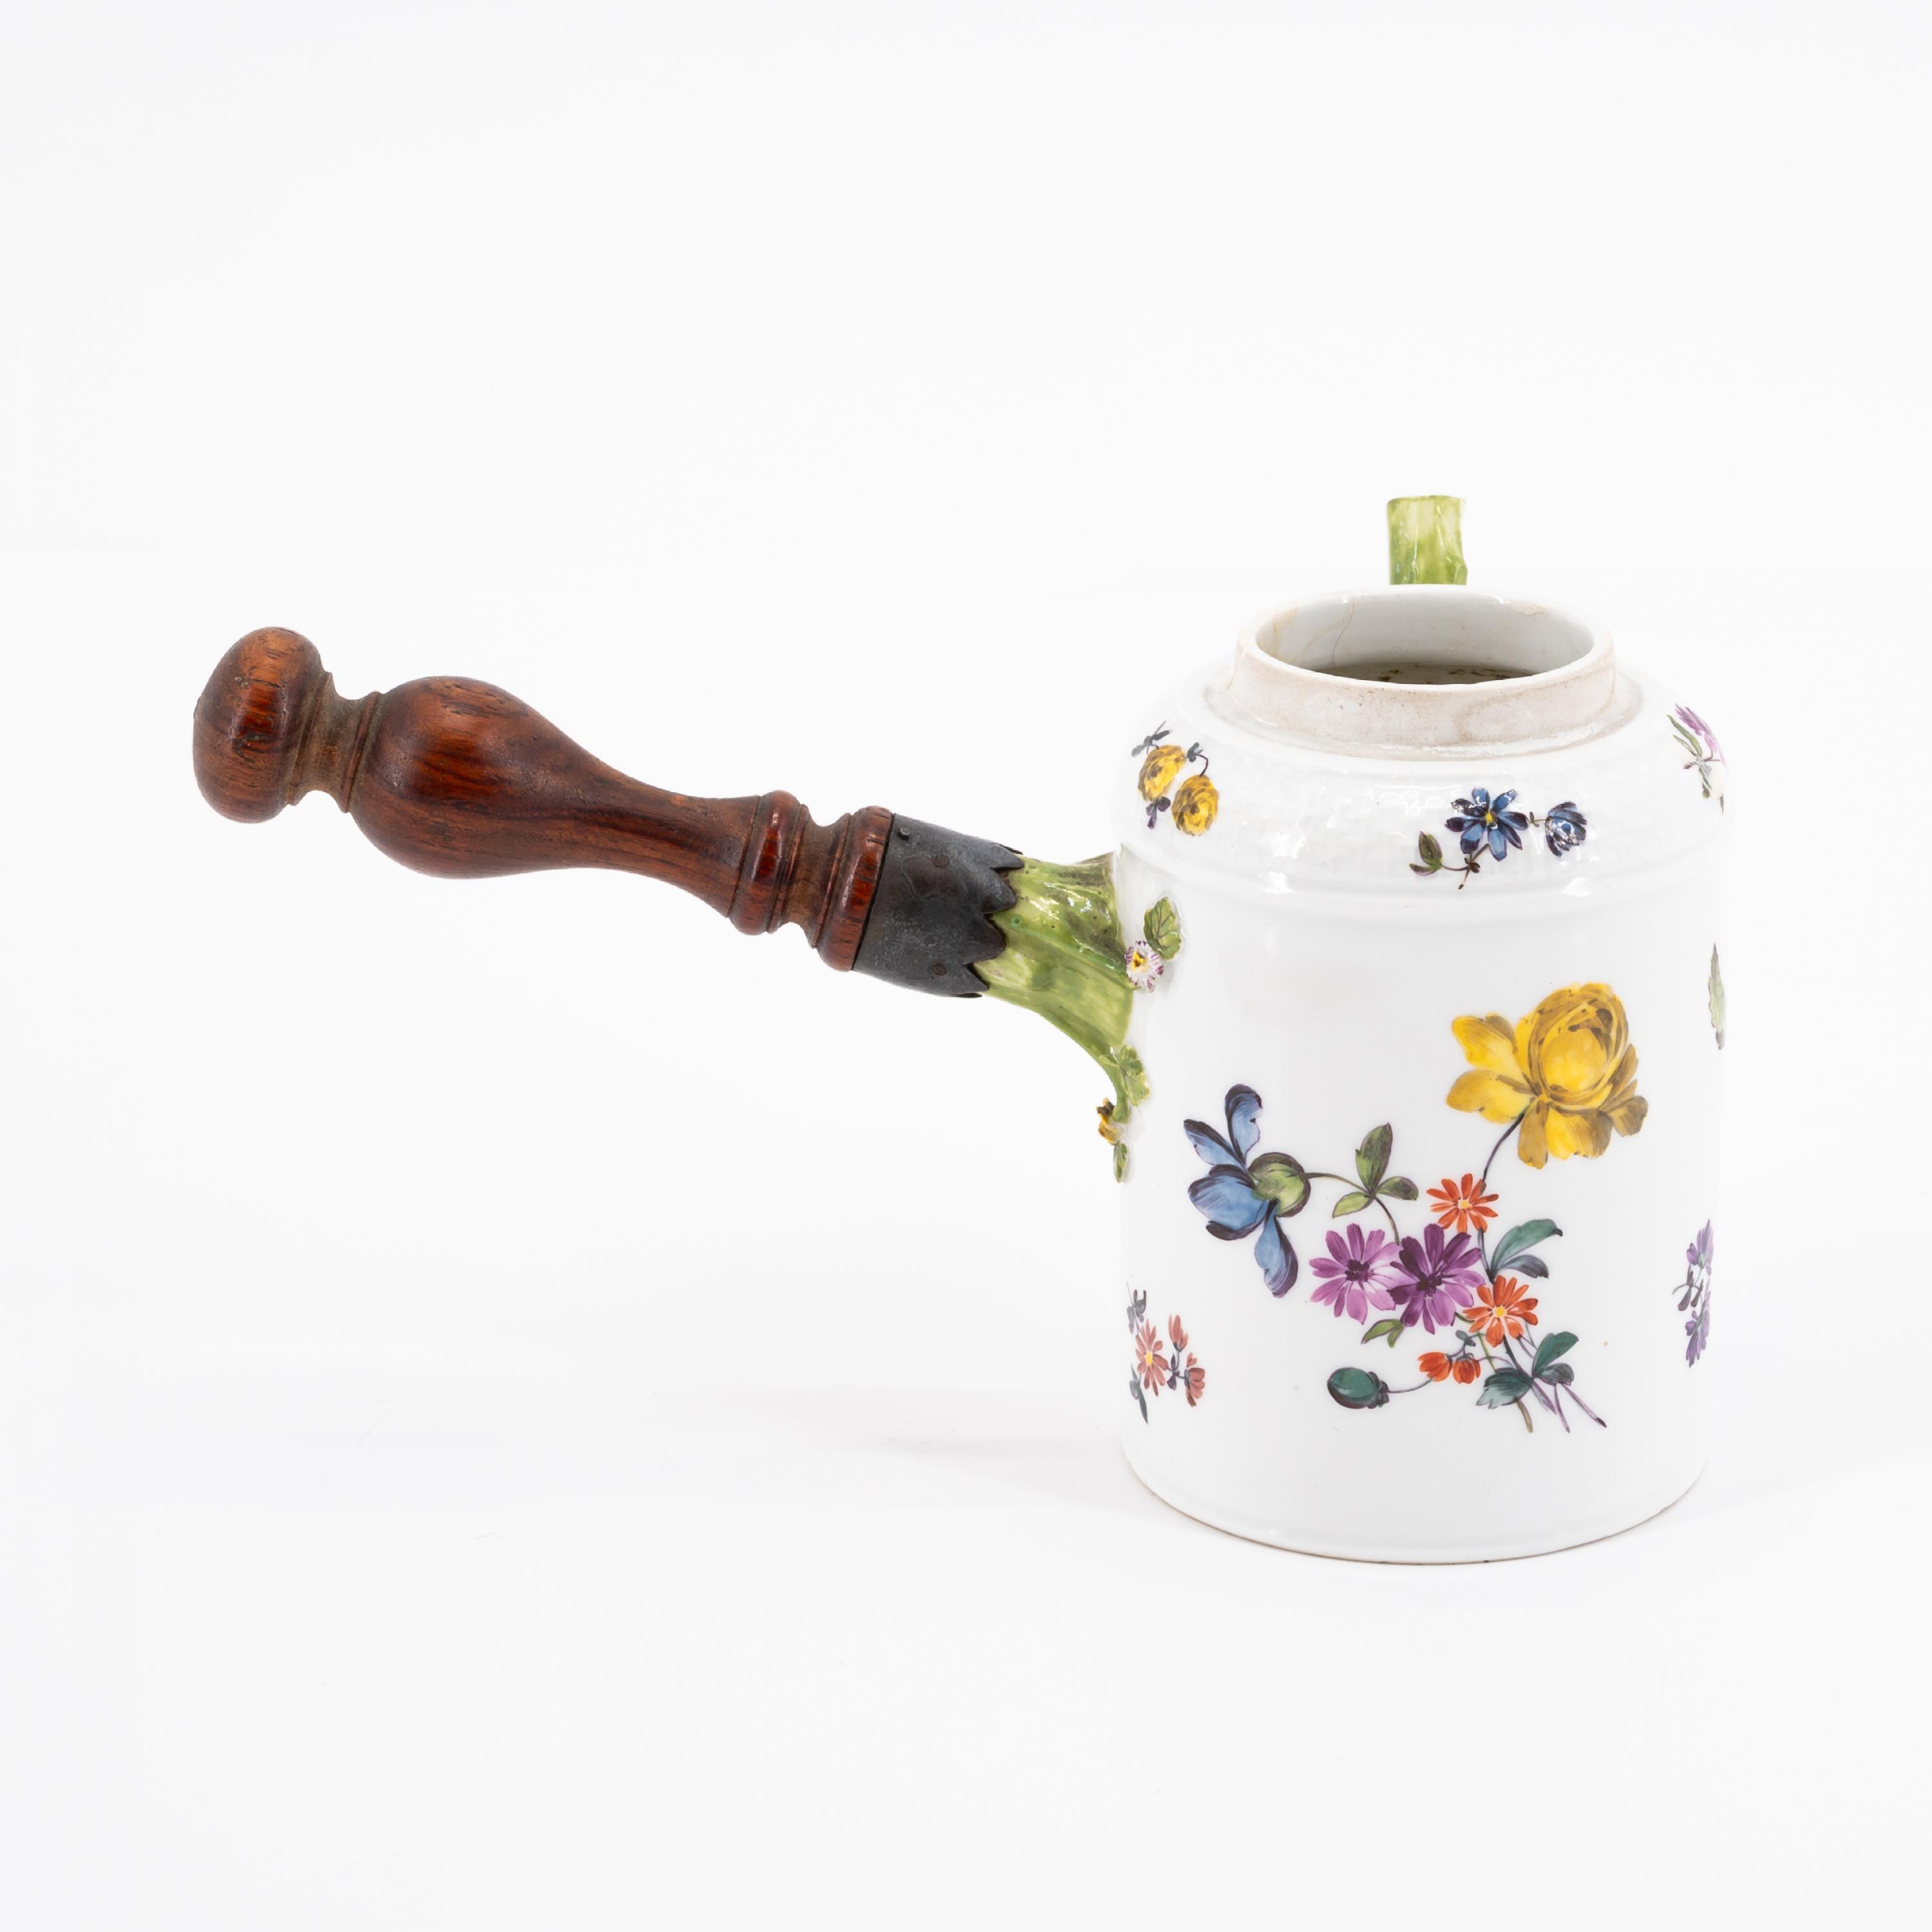 PORCELAIN BOURDALOU, BOWL AND CHOCOLATE POT WITH FLORAL DECOR - Image 10 of 13